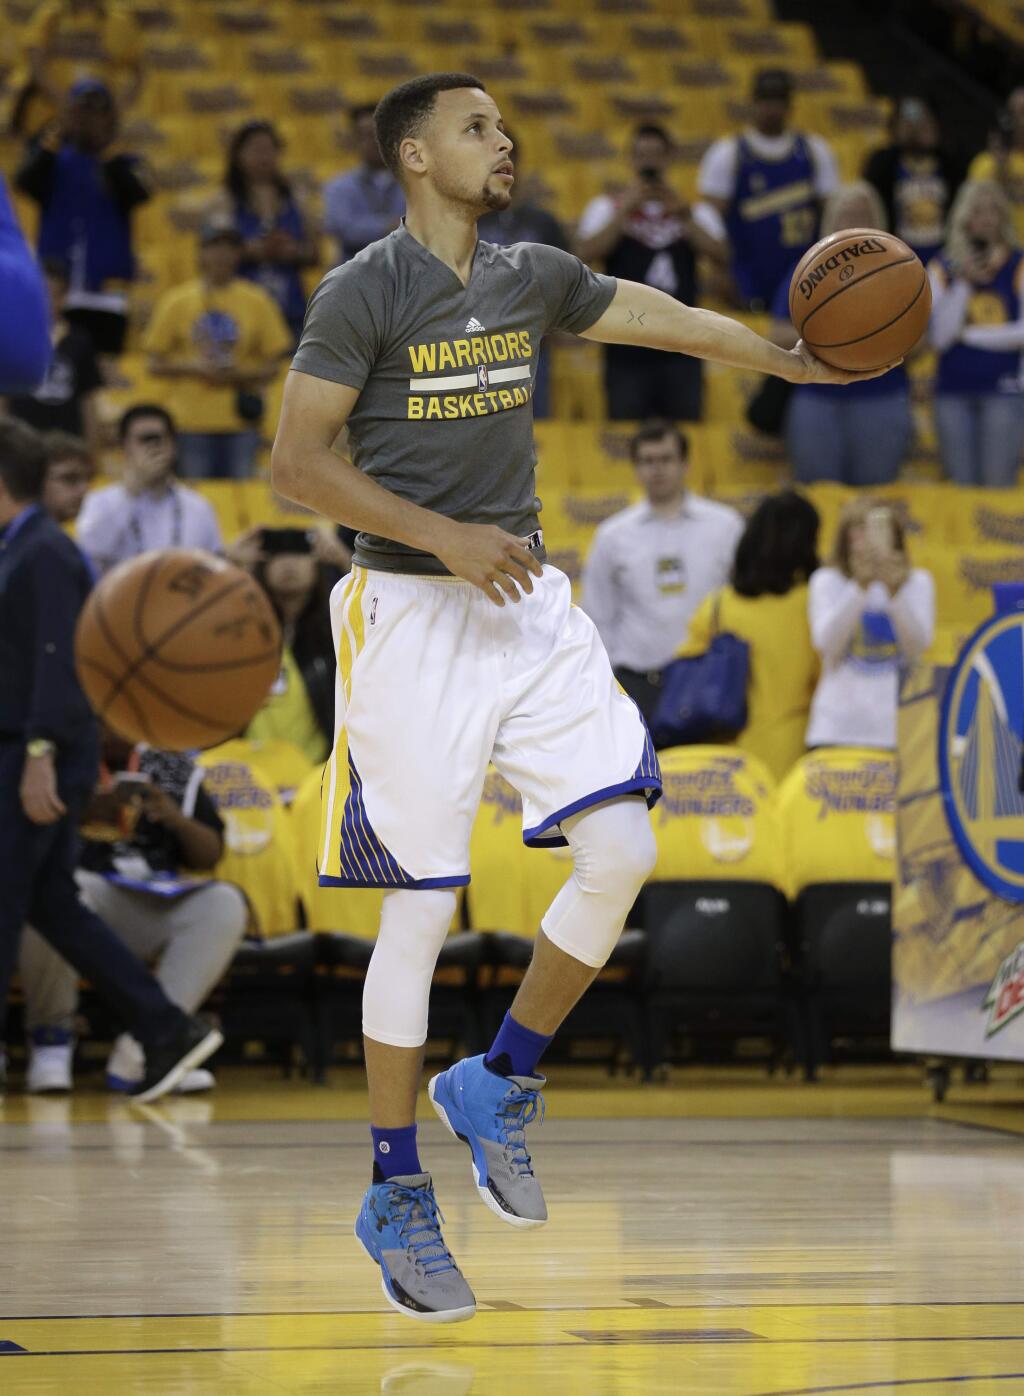 Golden State Warriors' Stephen Curry practices prior to Game 2 of a playoff series against the Houston Rockets Monday, April 18, 2016, in Oakland. (AP Photo/Ben Margot)